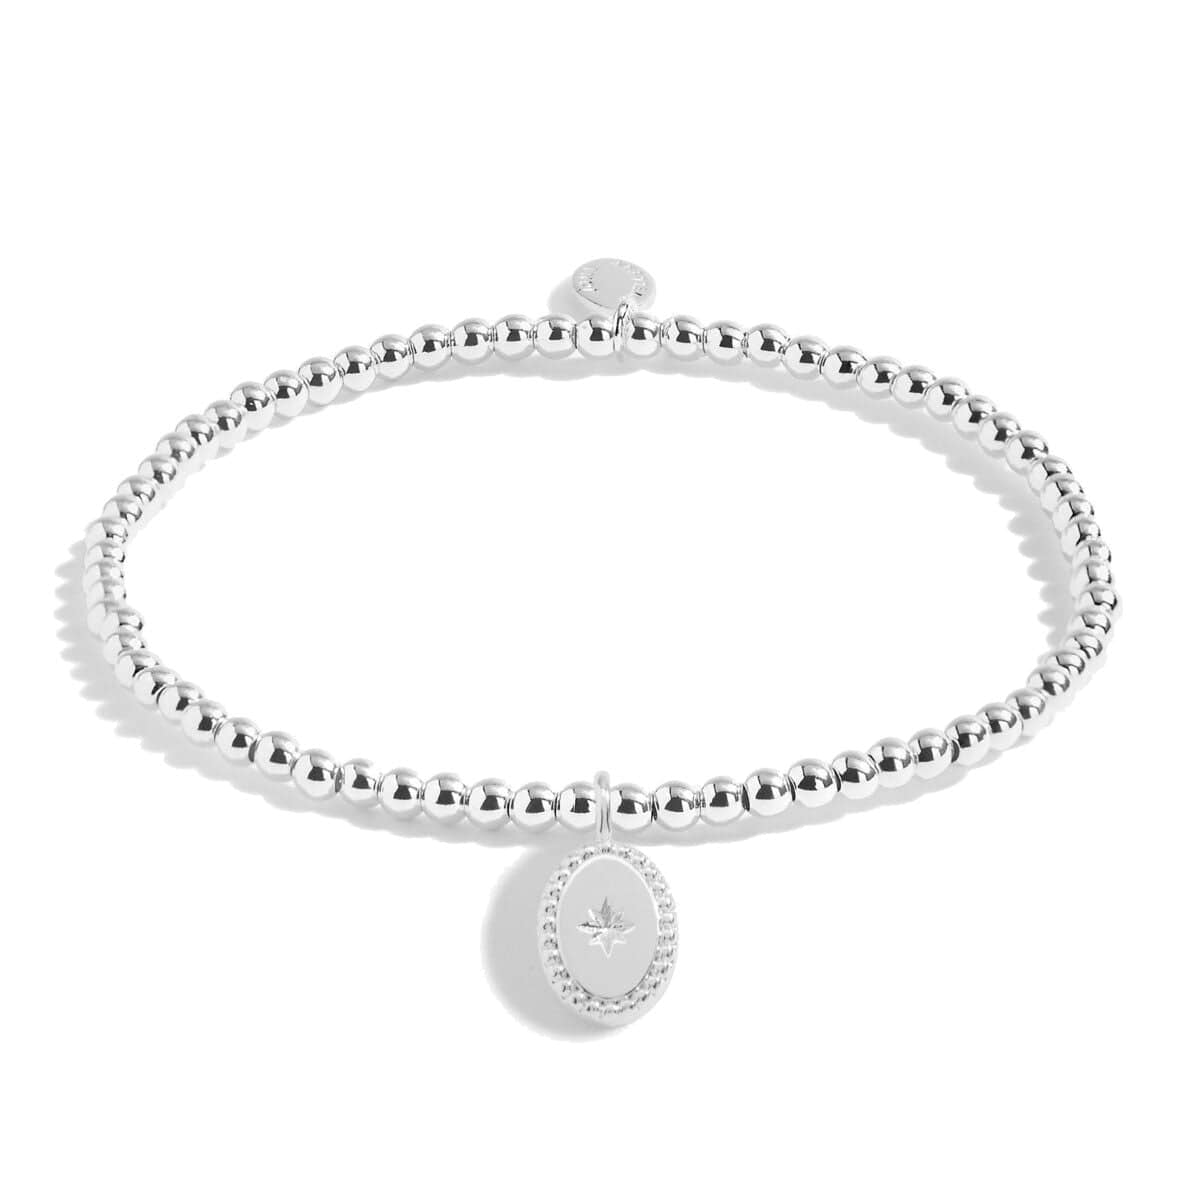 Joma Jewellery Bracelet Joma Jewellery Bracelet - A Little Forever Remembered